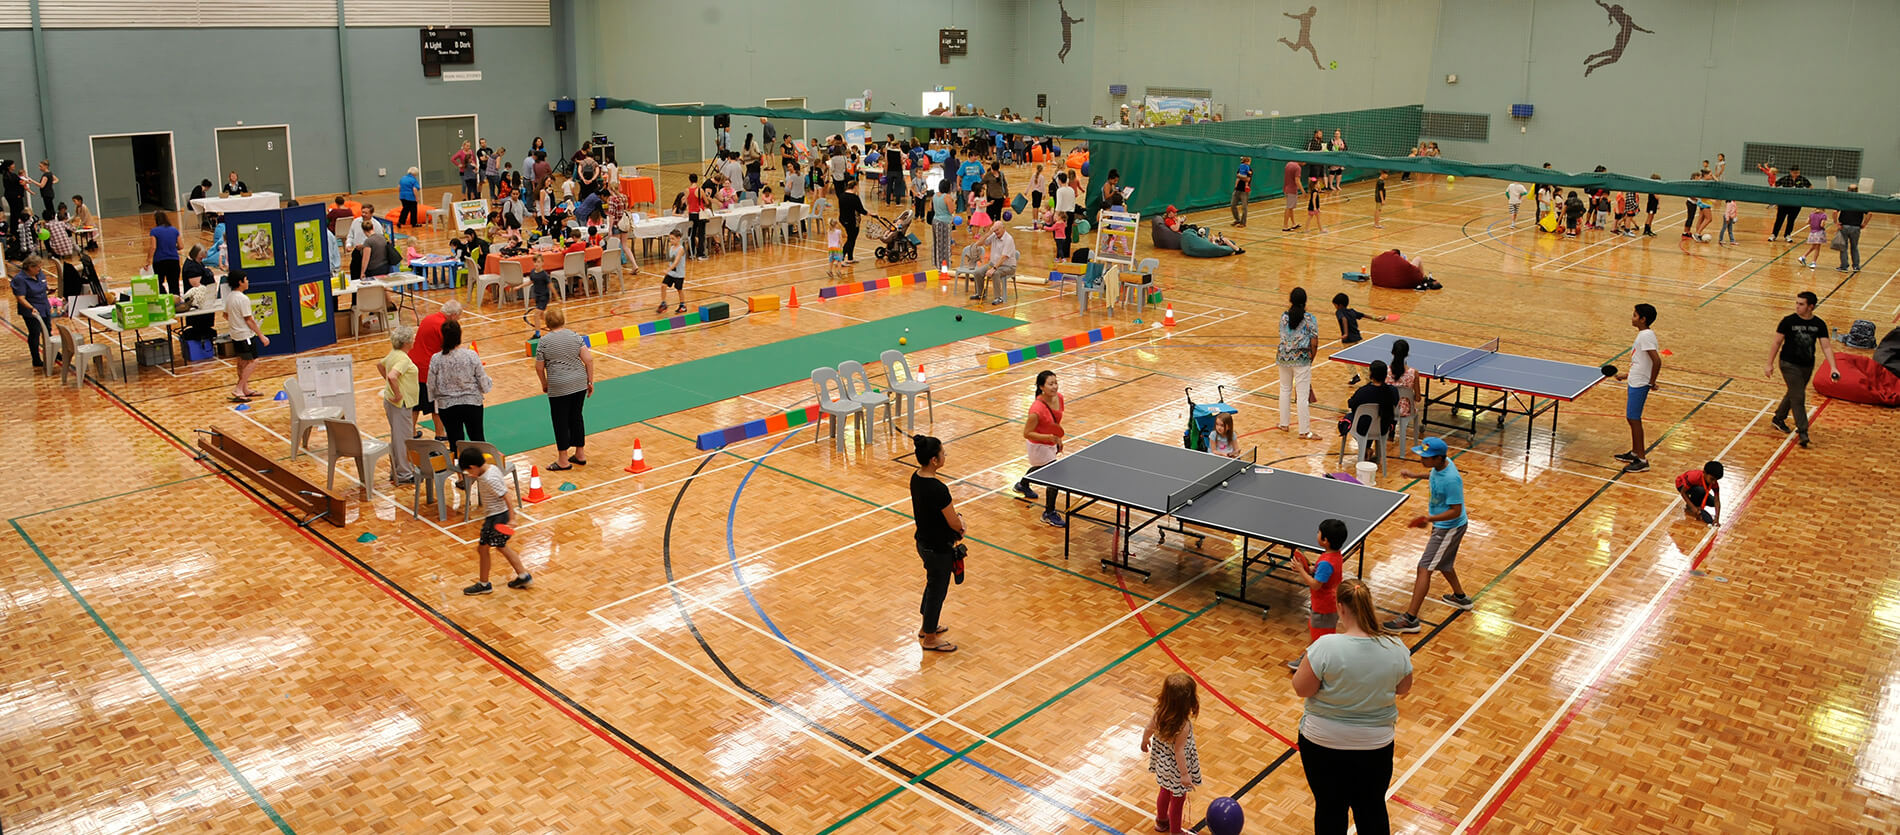 People participating in events at Hartfield Park Recreation Centre